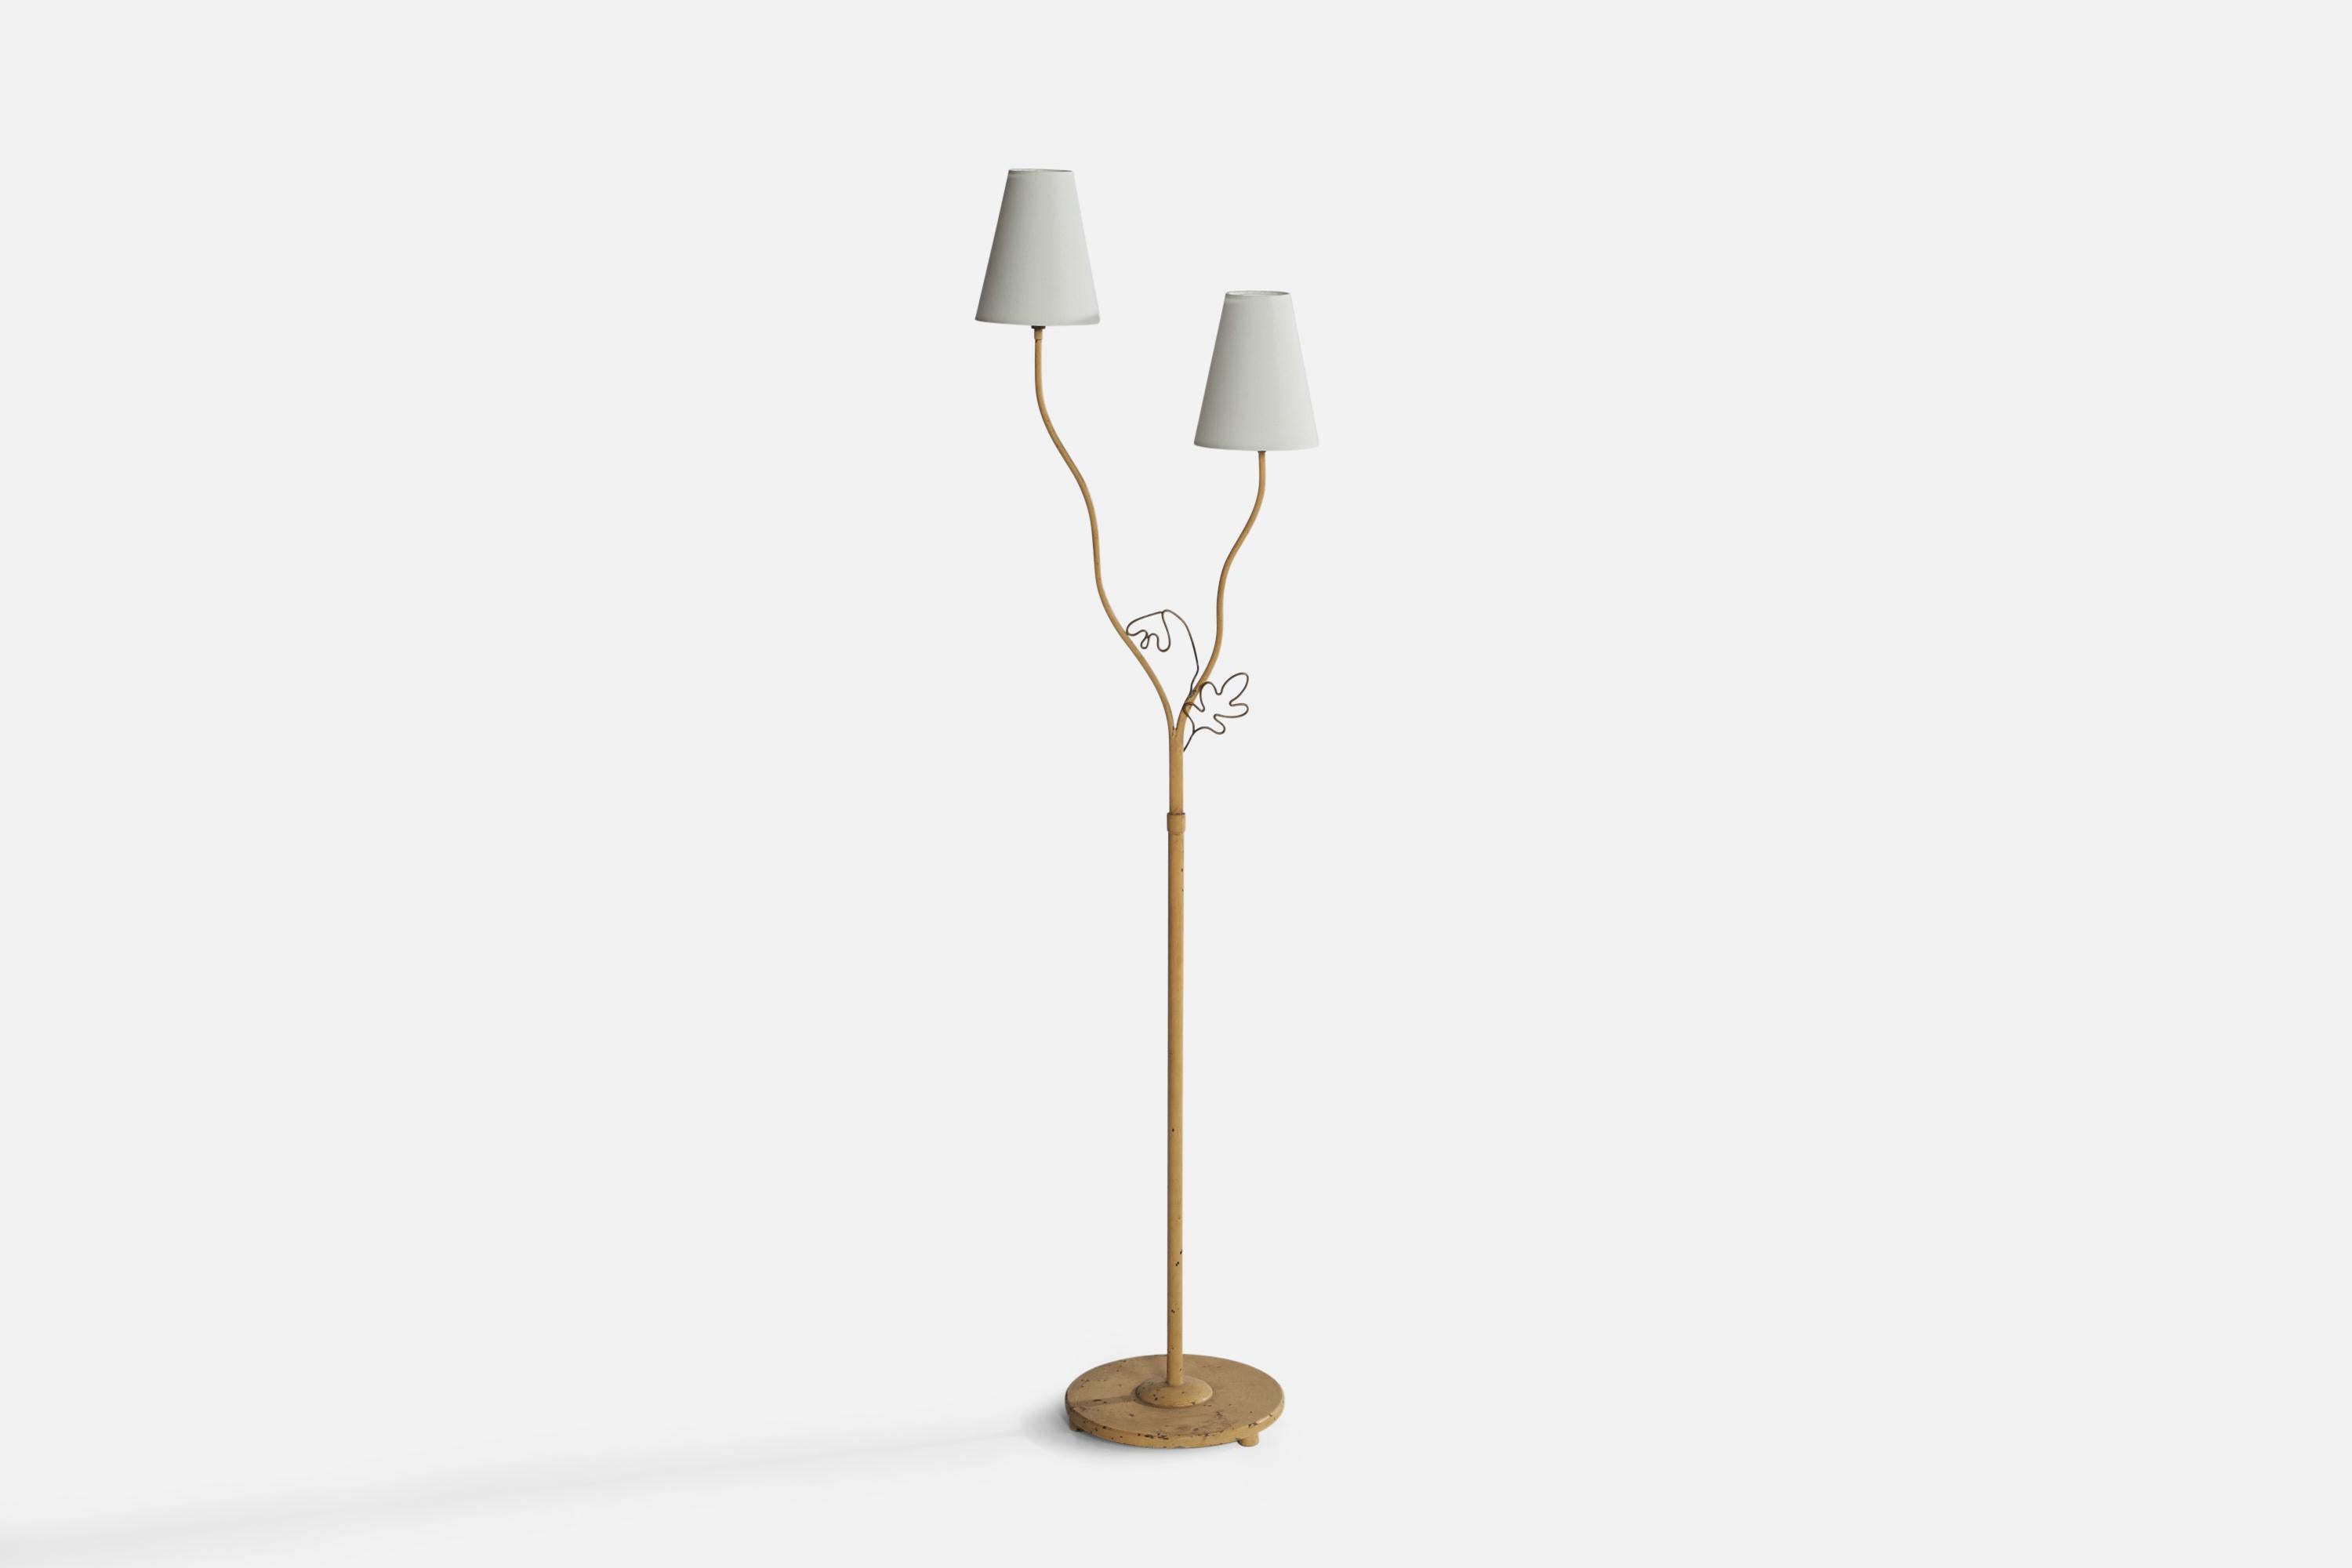 An organic two-armed beige-lacquered metal and white fabric floor lamp designed and produced by Bjerkås Armatur, Sweden, 1940s.

Overall Dimensions (inches): 58” H x 15” W x 10.5” D. Stated dimensions include shade.
Bulb Specifications: E-26